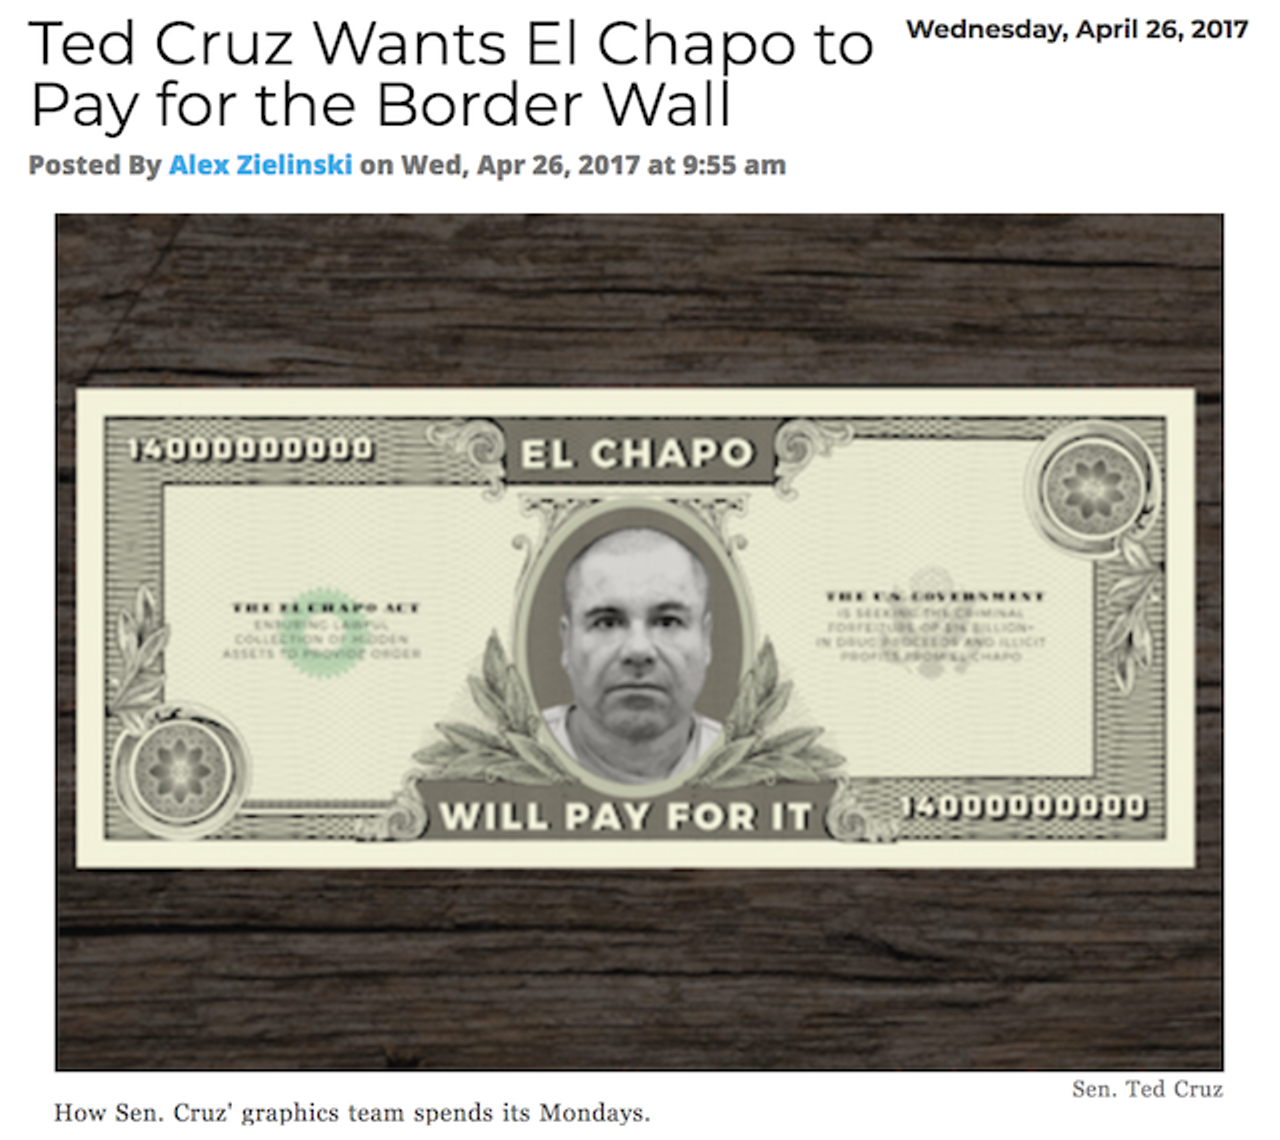 Sen. Ted Cruz came up with the novel idea that we should use El Chapo's seized assets to build Trump's contentious wall, since, you know, Mexico isn't going to pay for it. Unfortunately for Cruz, the feds still haven't found El Chapo's supposed $14 billion stash of cash. Read more.